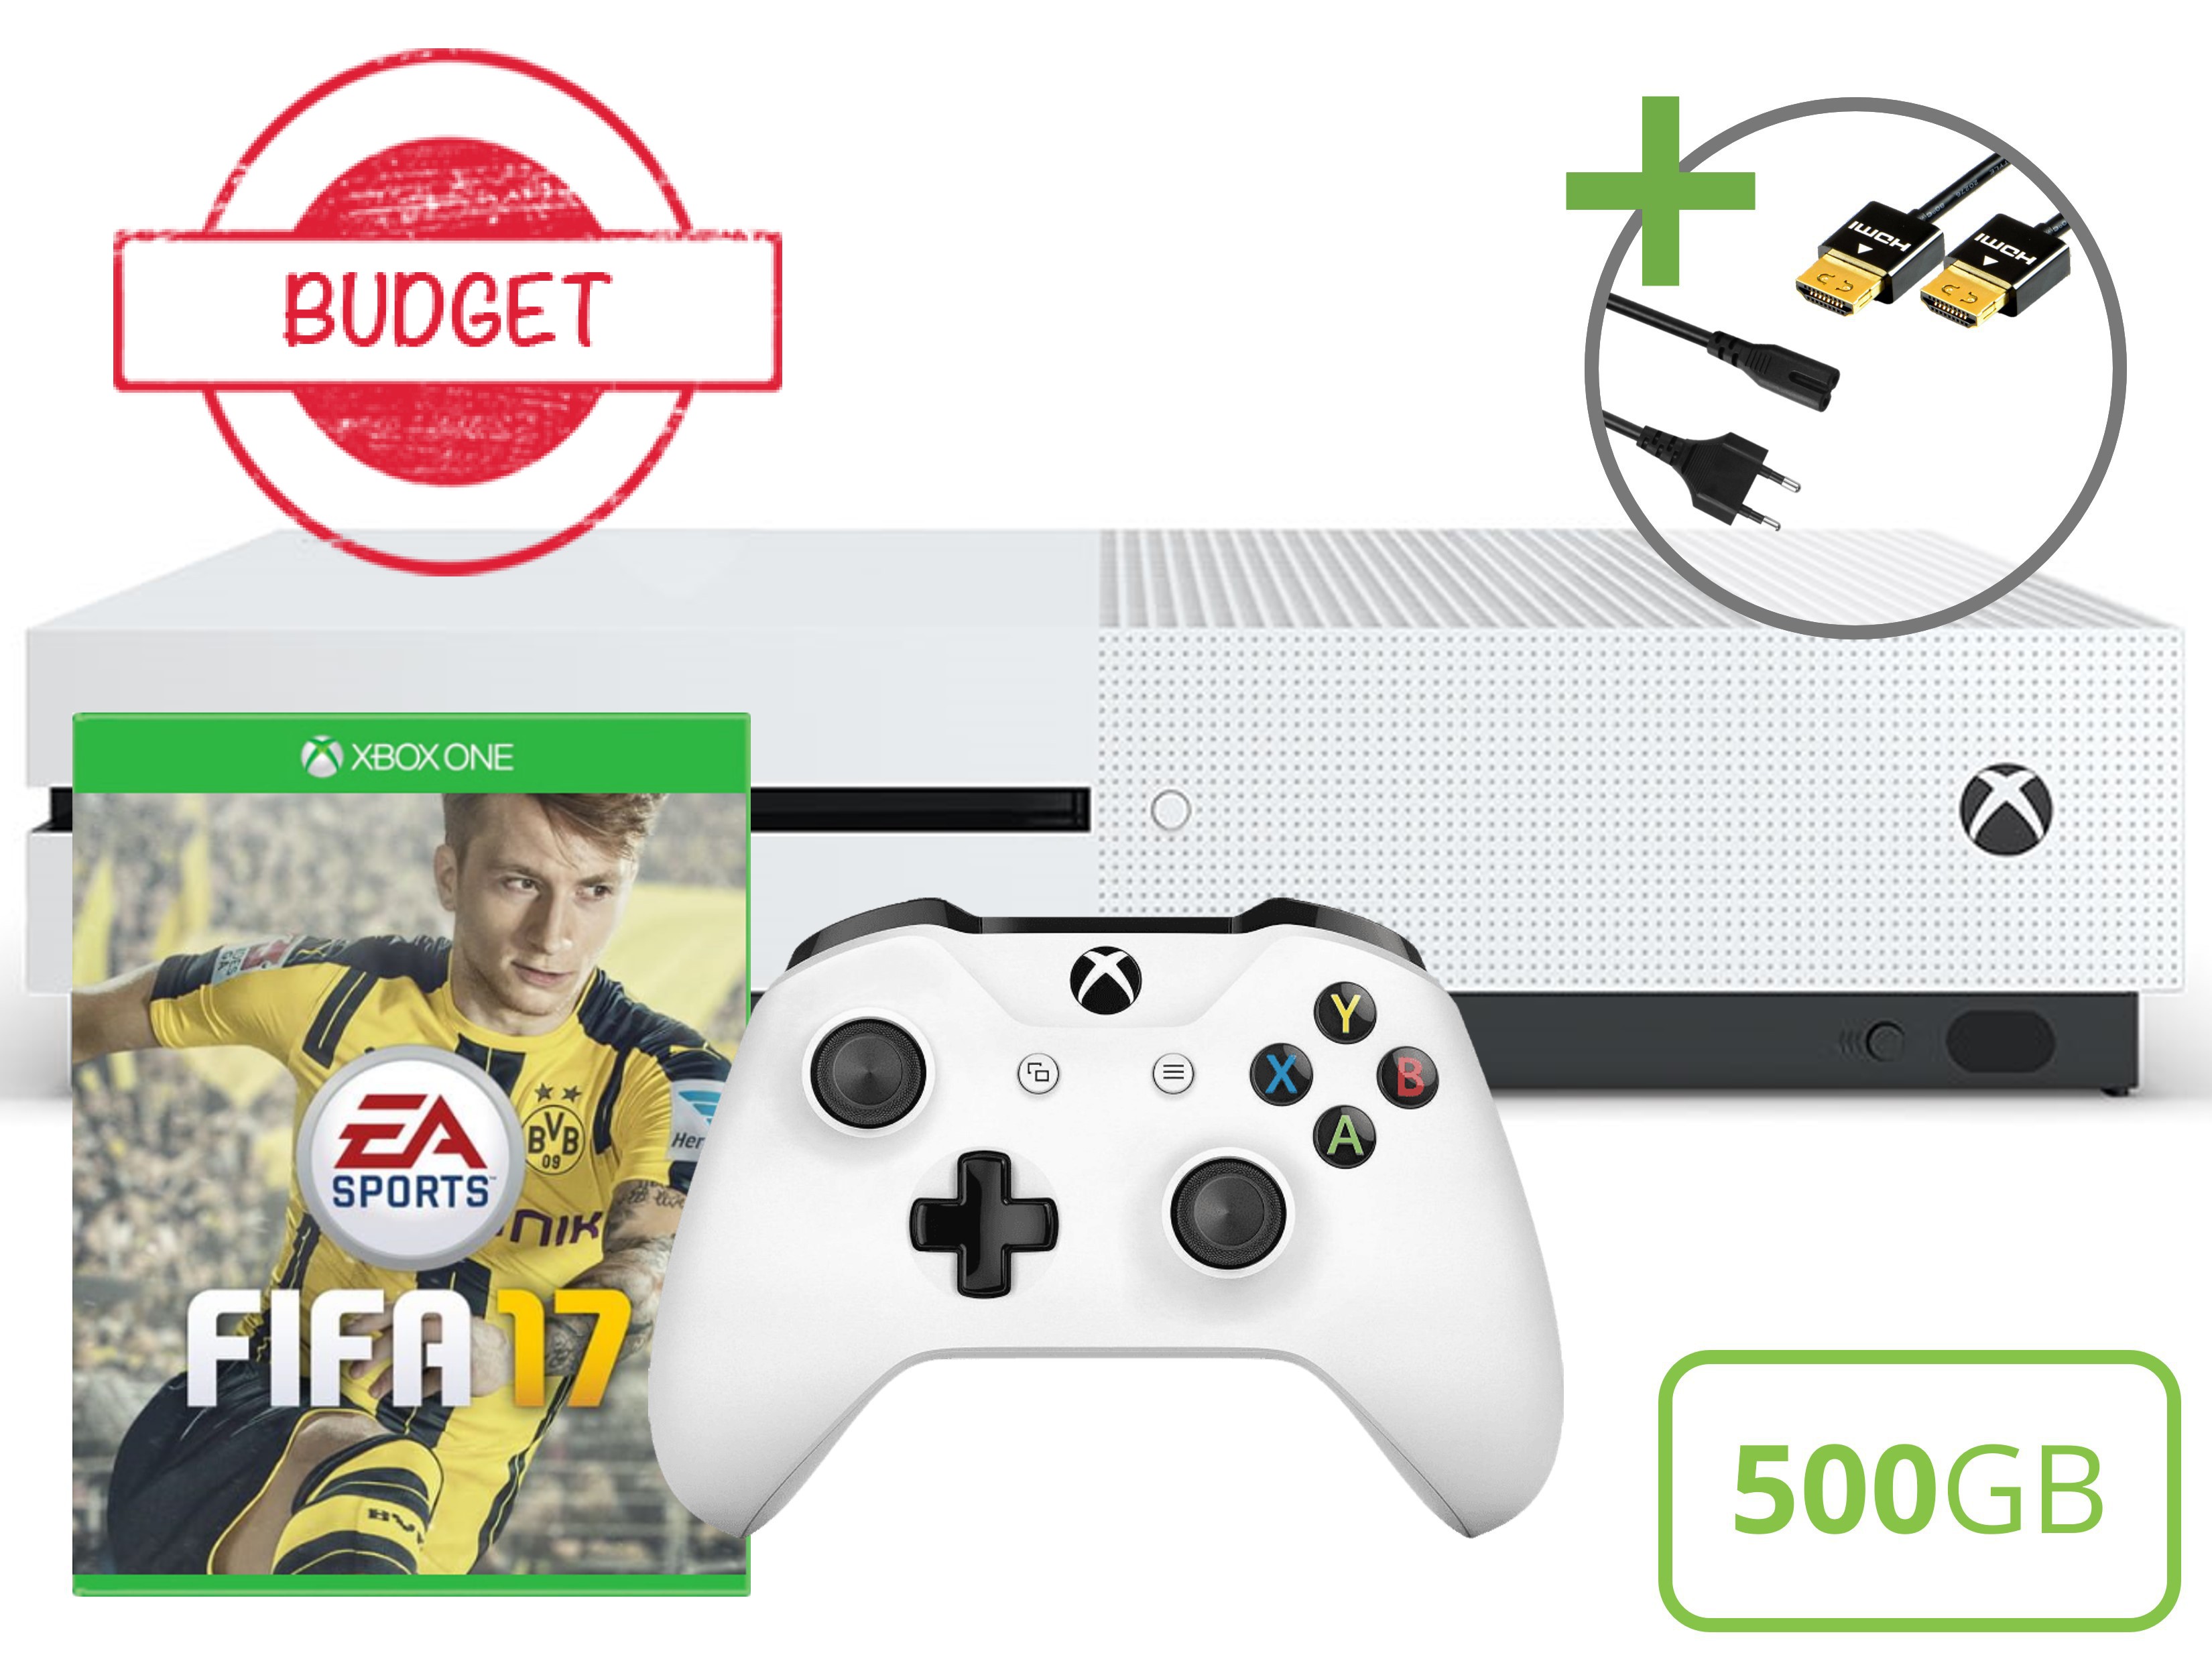 Microsoft Xbox One S Starter Pack - 500GB FIFA 17 Edition - Budget Kopen | Xbox One Hardware